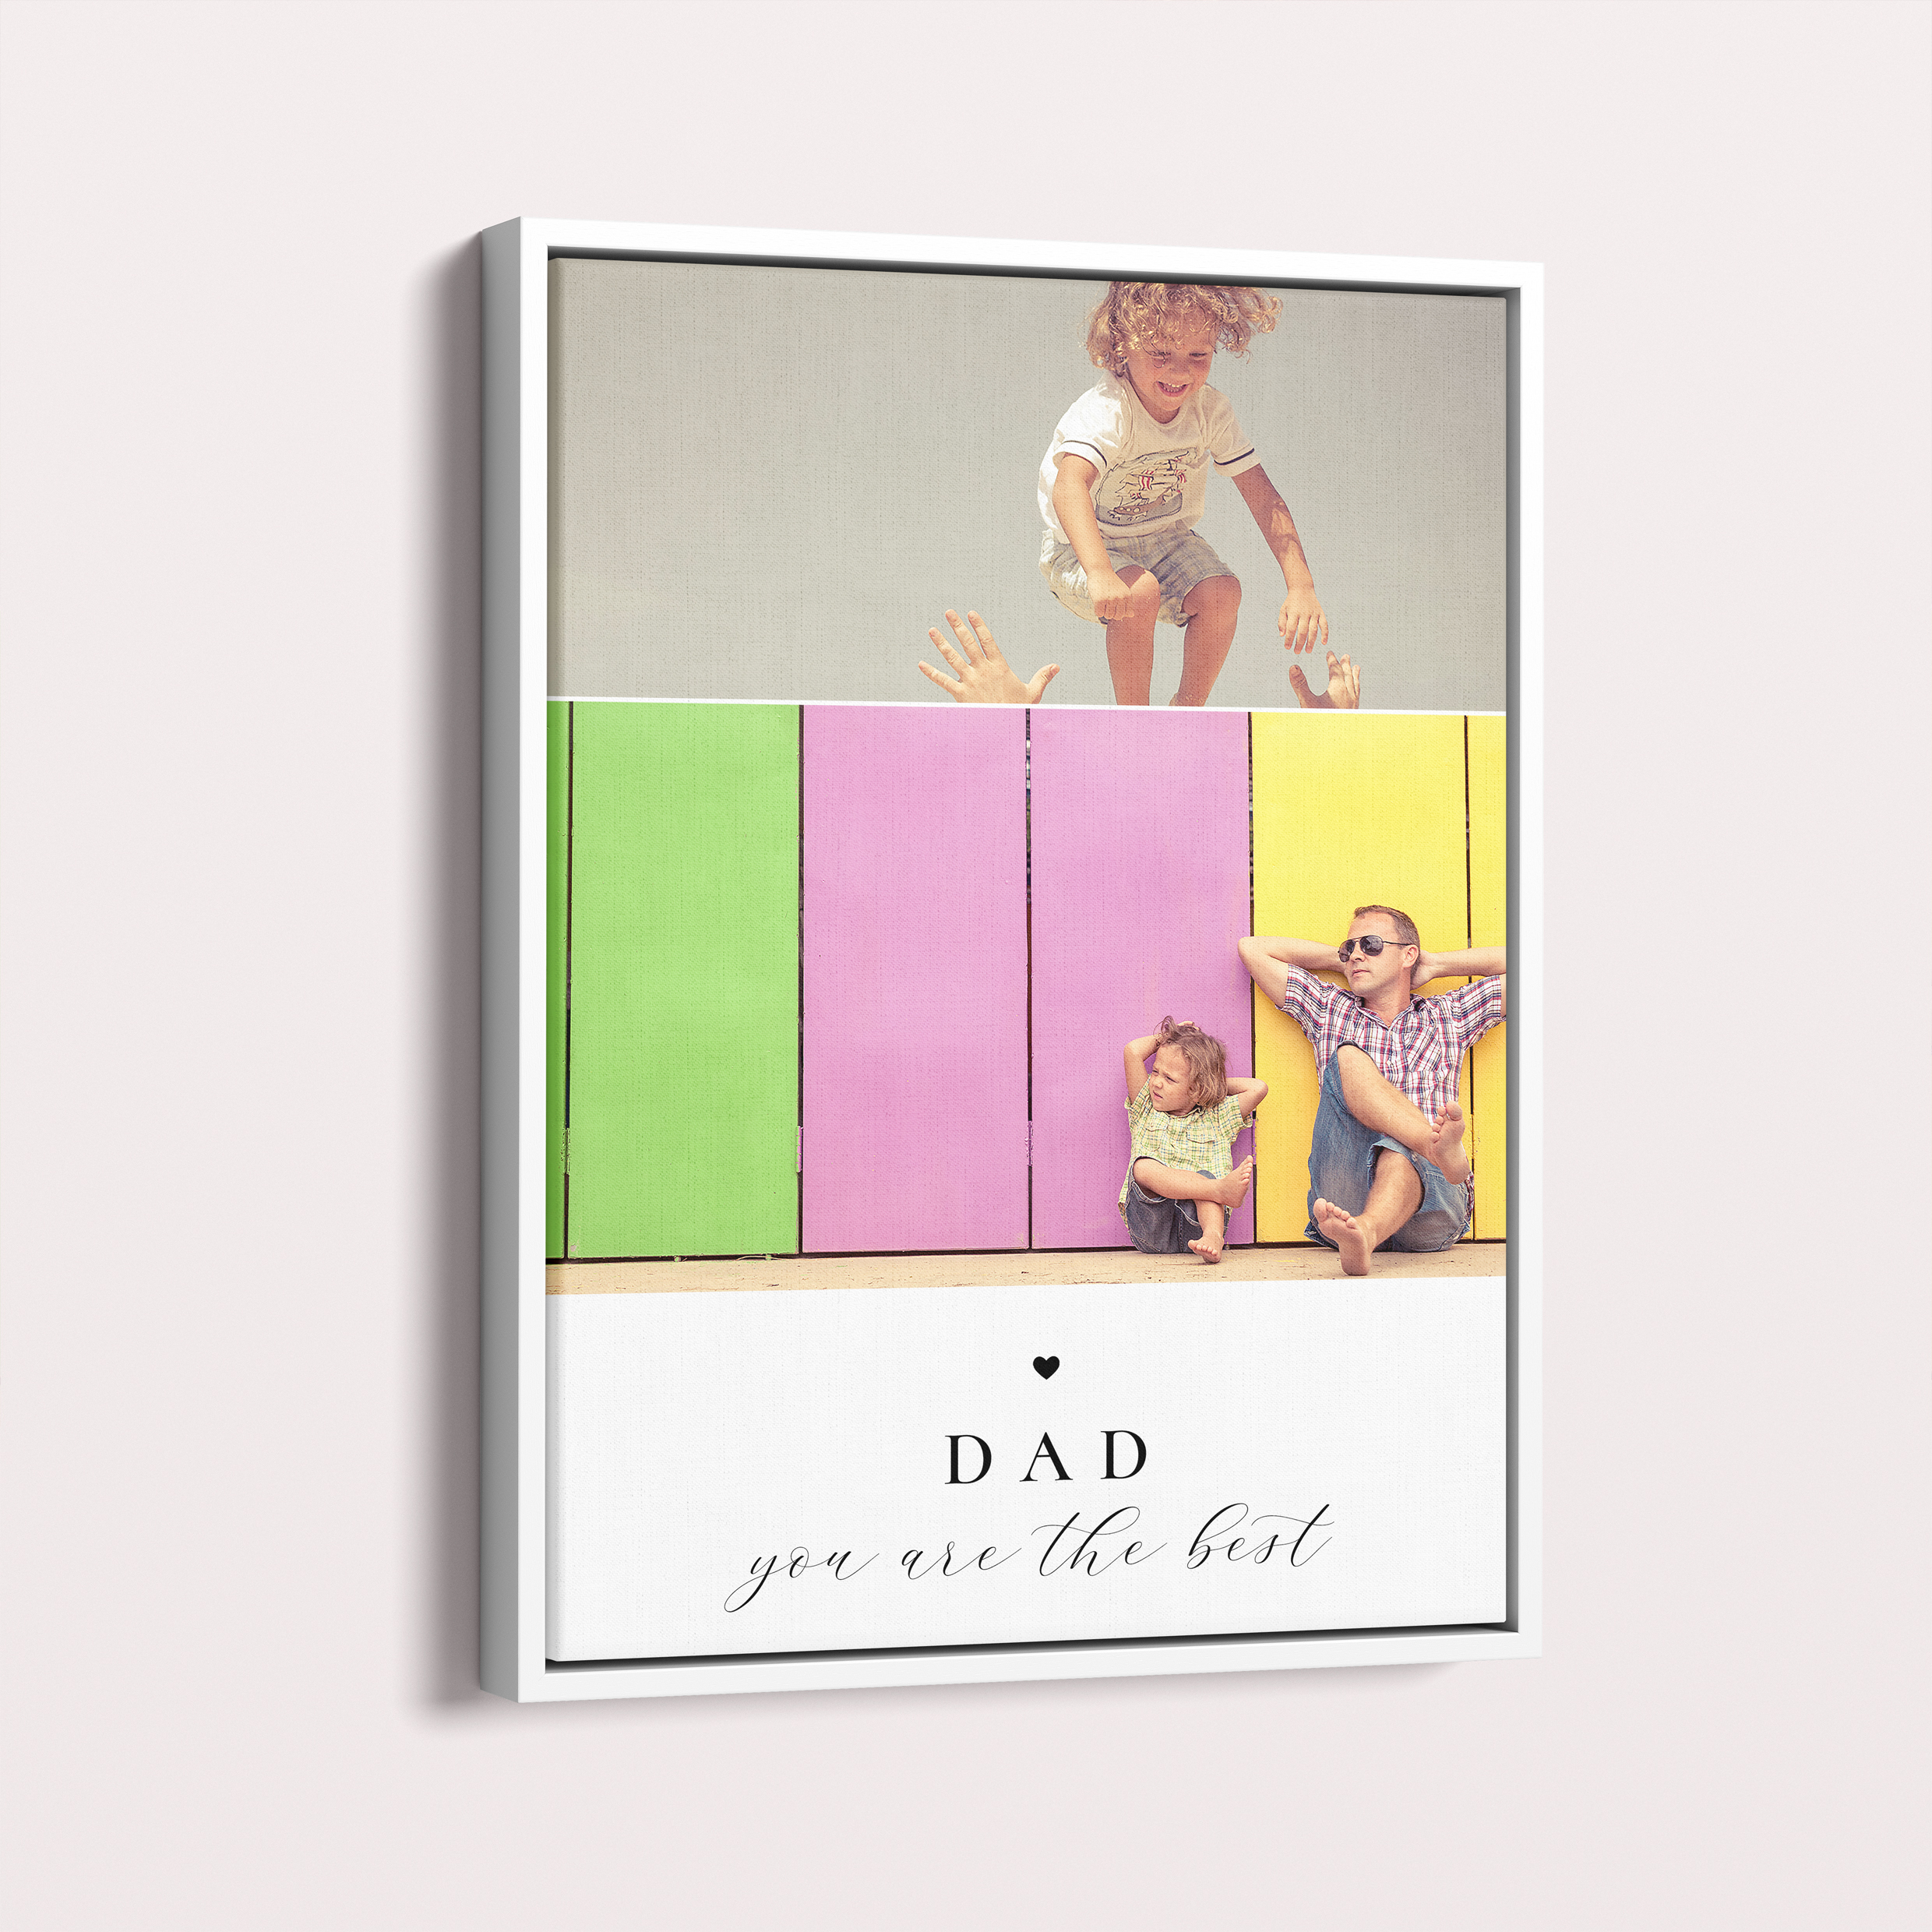 Father's Bond Framed Photo Canvas - Immortalize Love with Cherished Memories